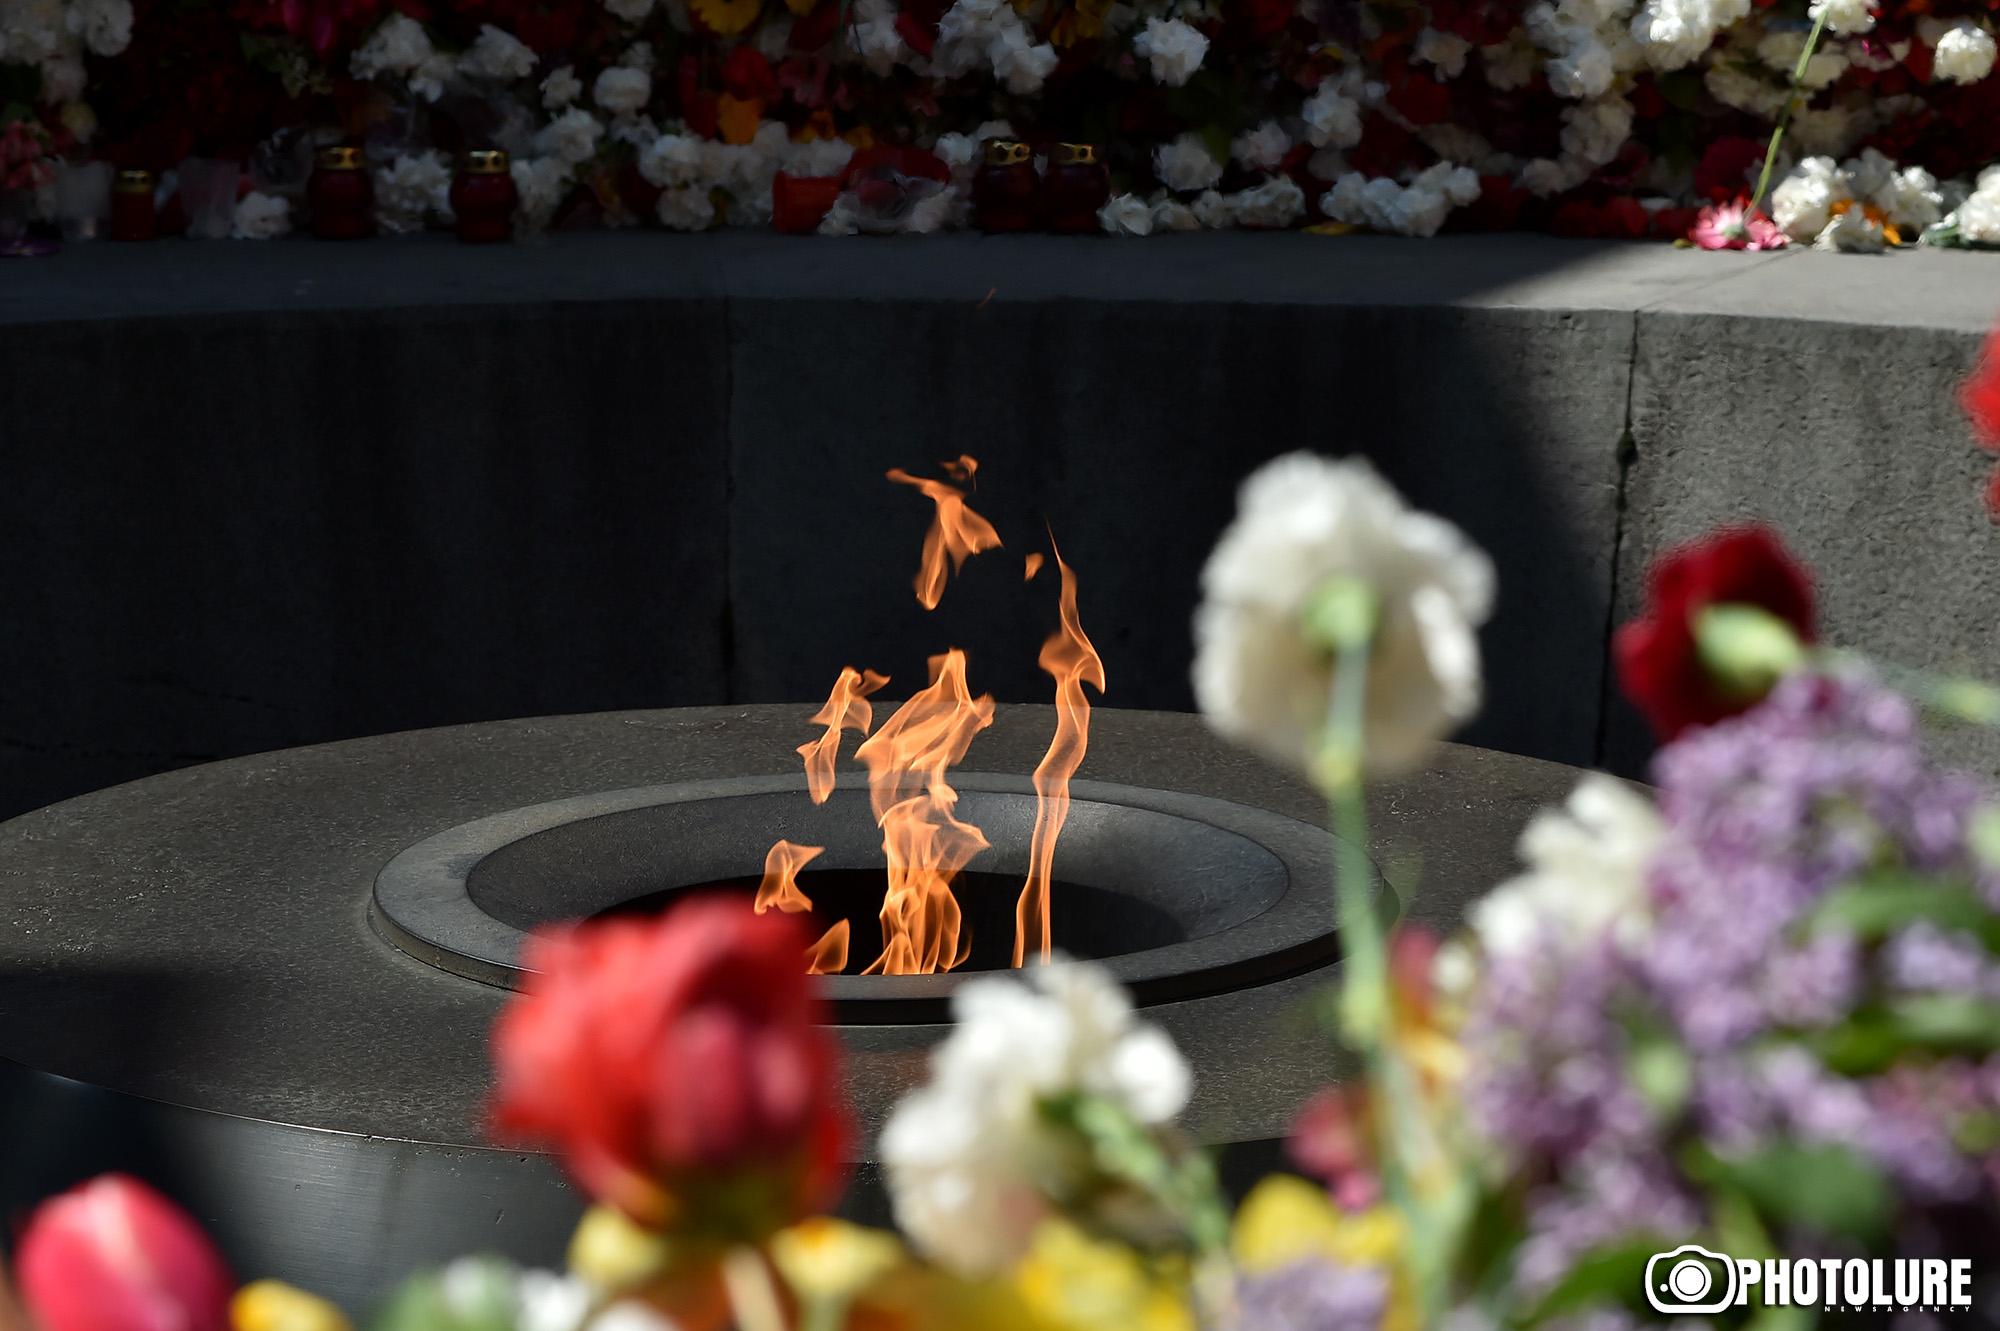 Israel’s Refusal to Recognize the Armenian Genocide Is Shameful and Immoral